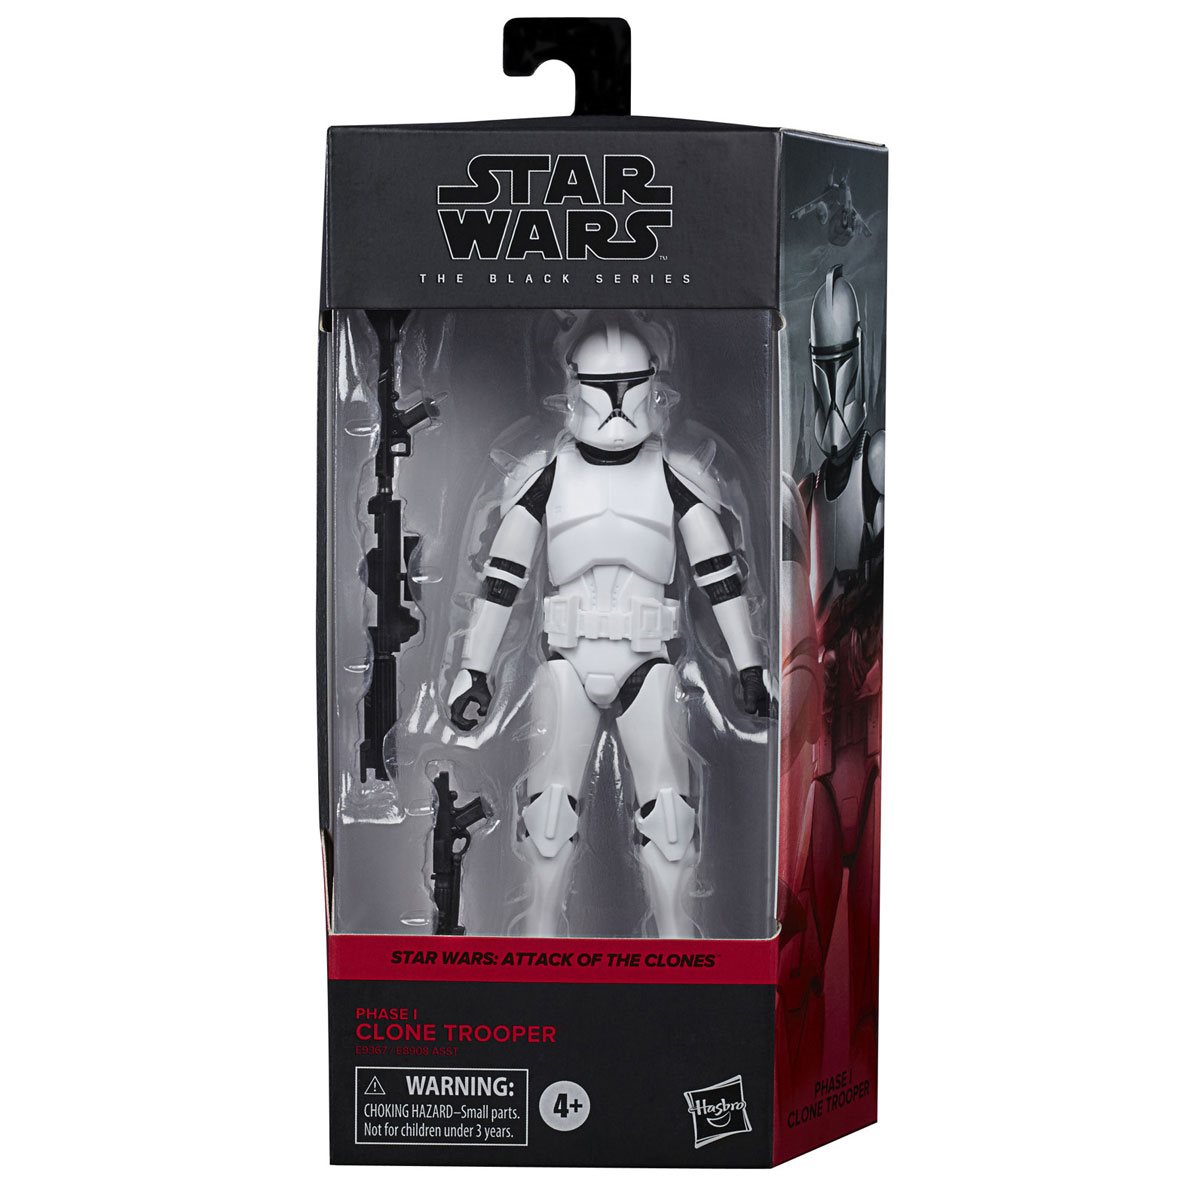 Star Wars Black Series 6 Inch Exclusive Phase 1 Clone Trooper Commander New 